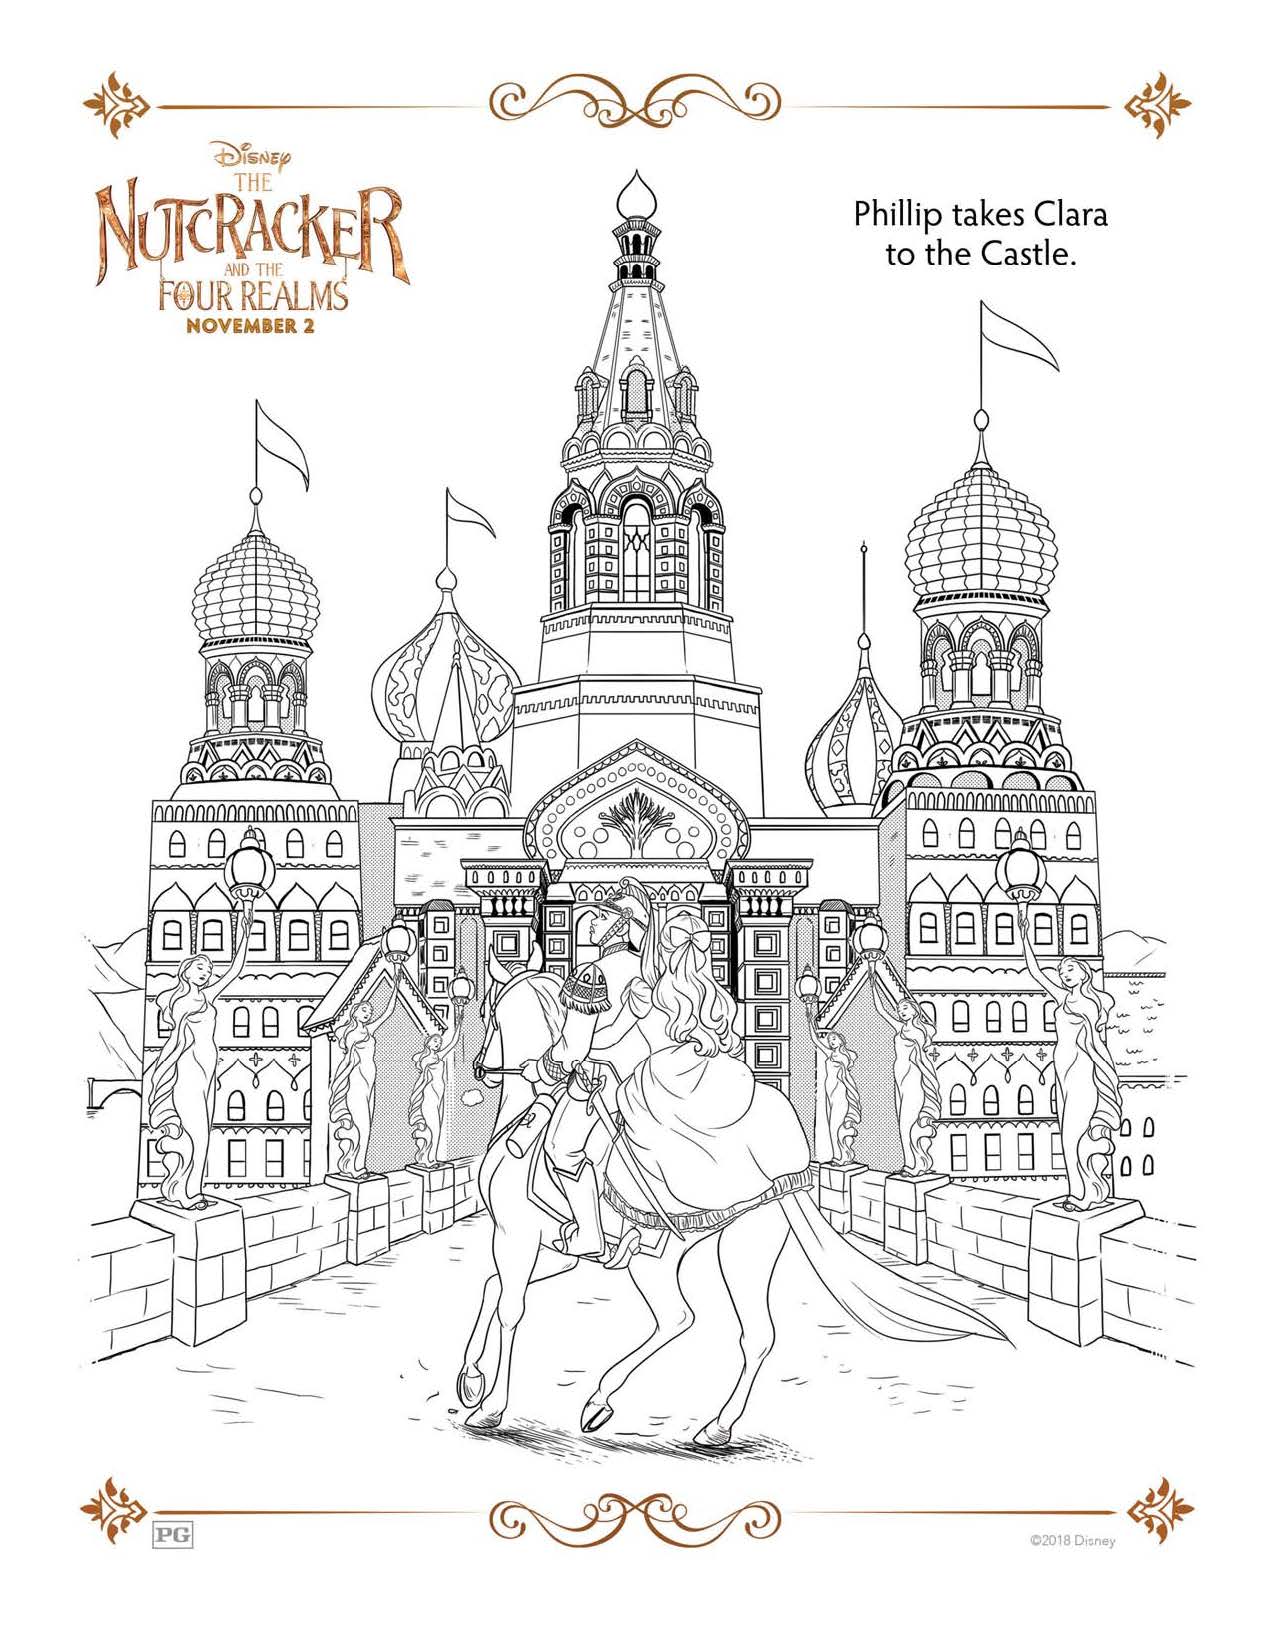 The Castle - The Nutcracker and The Four Realms Coloring Pages and Activity Sheets